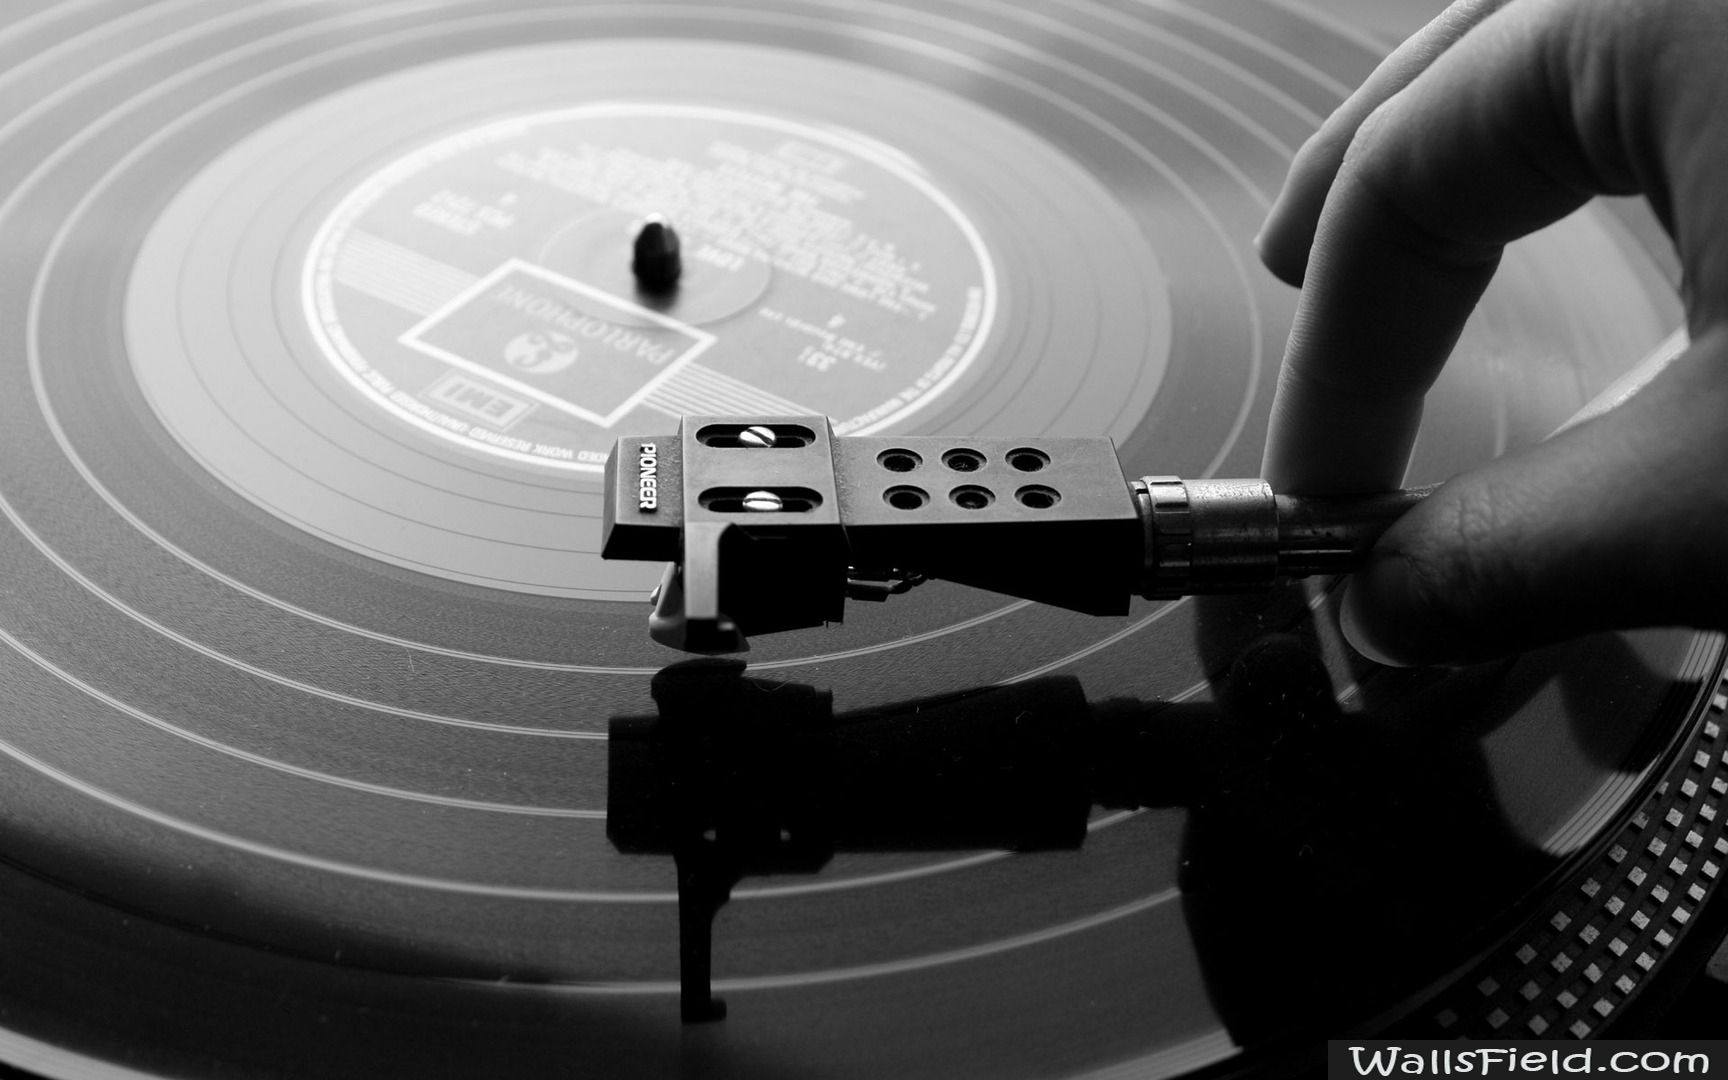 Turntable Wallpaper - Wallsfield.com Free HD Backgrounds